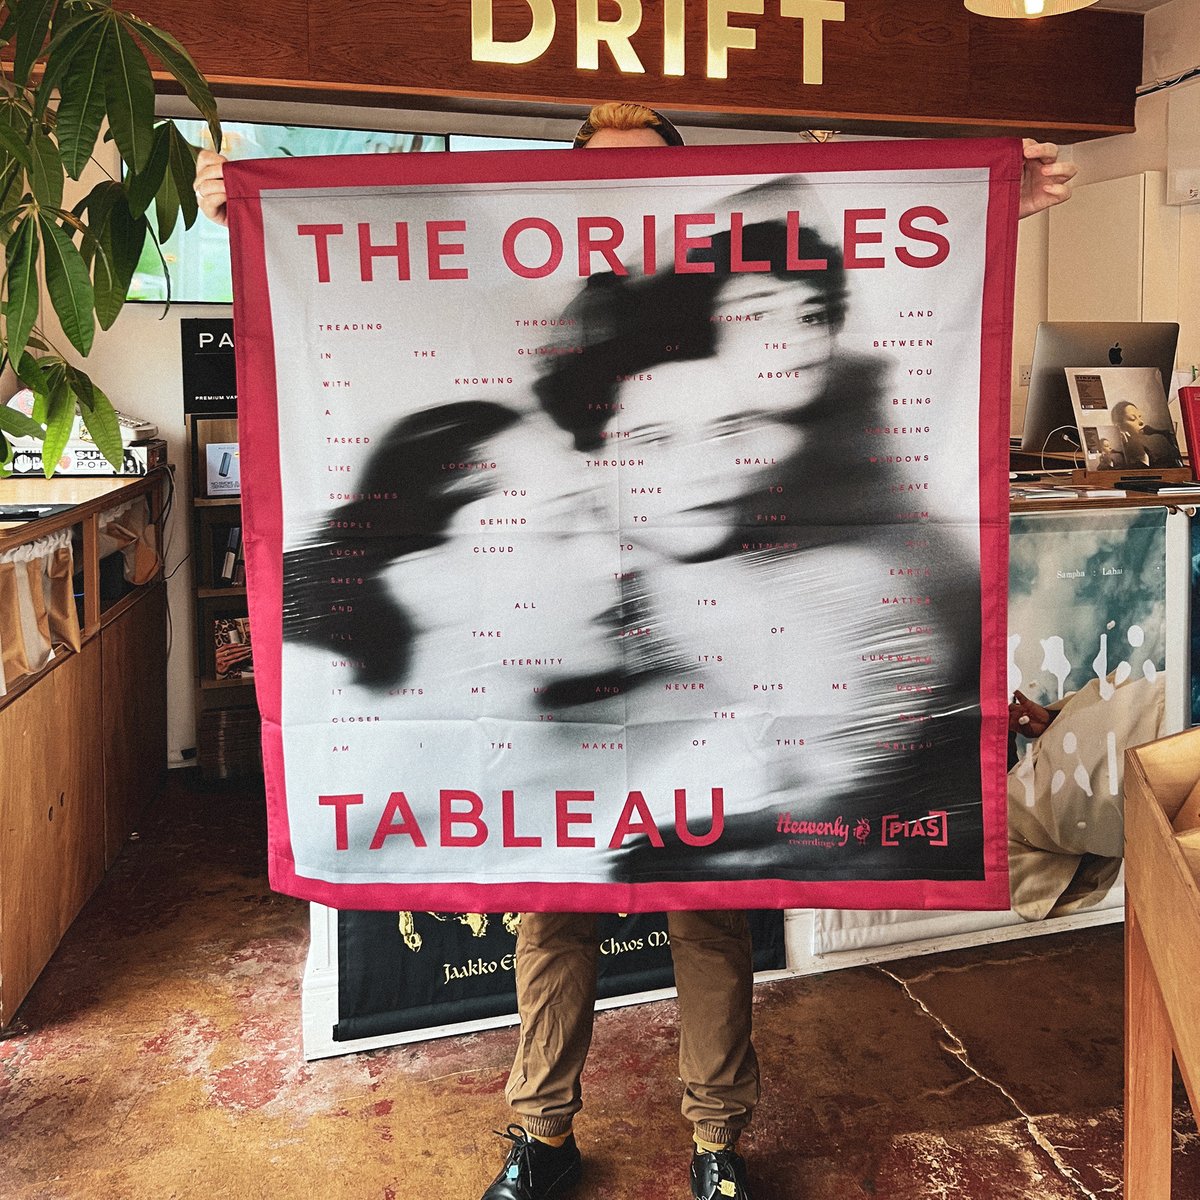 TONIGHT TONIGHT! THE ORIELLES COME TO TOWN!!! 7pm: DOORS (@bhtotnes) 8pm: T.D (@drycleaningband) 9pm: @TheOrielles We'll take tickets offline shortly, but will save a couple for the door. seachangepresents.co.uk/events/orielles